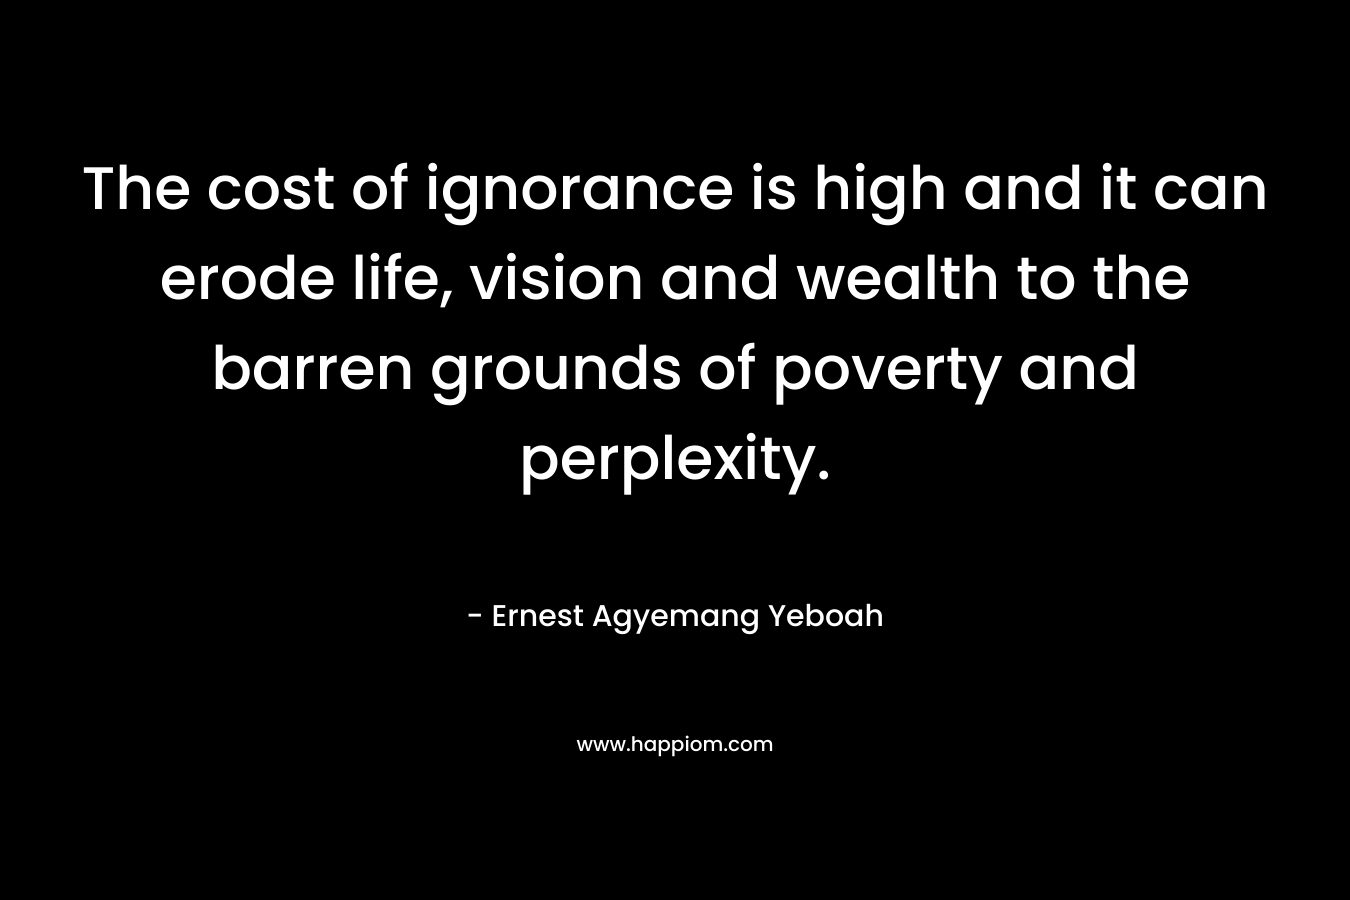 The cost of ignorance is high and it can erode life, vision and wealth to the barren grounds of poverty and perplexity. – Ernest Agyemang Yeboah